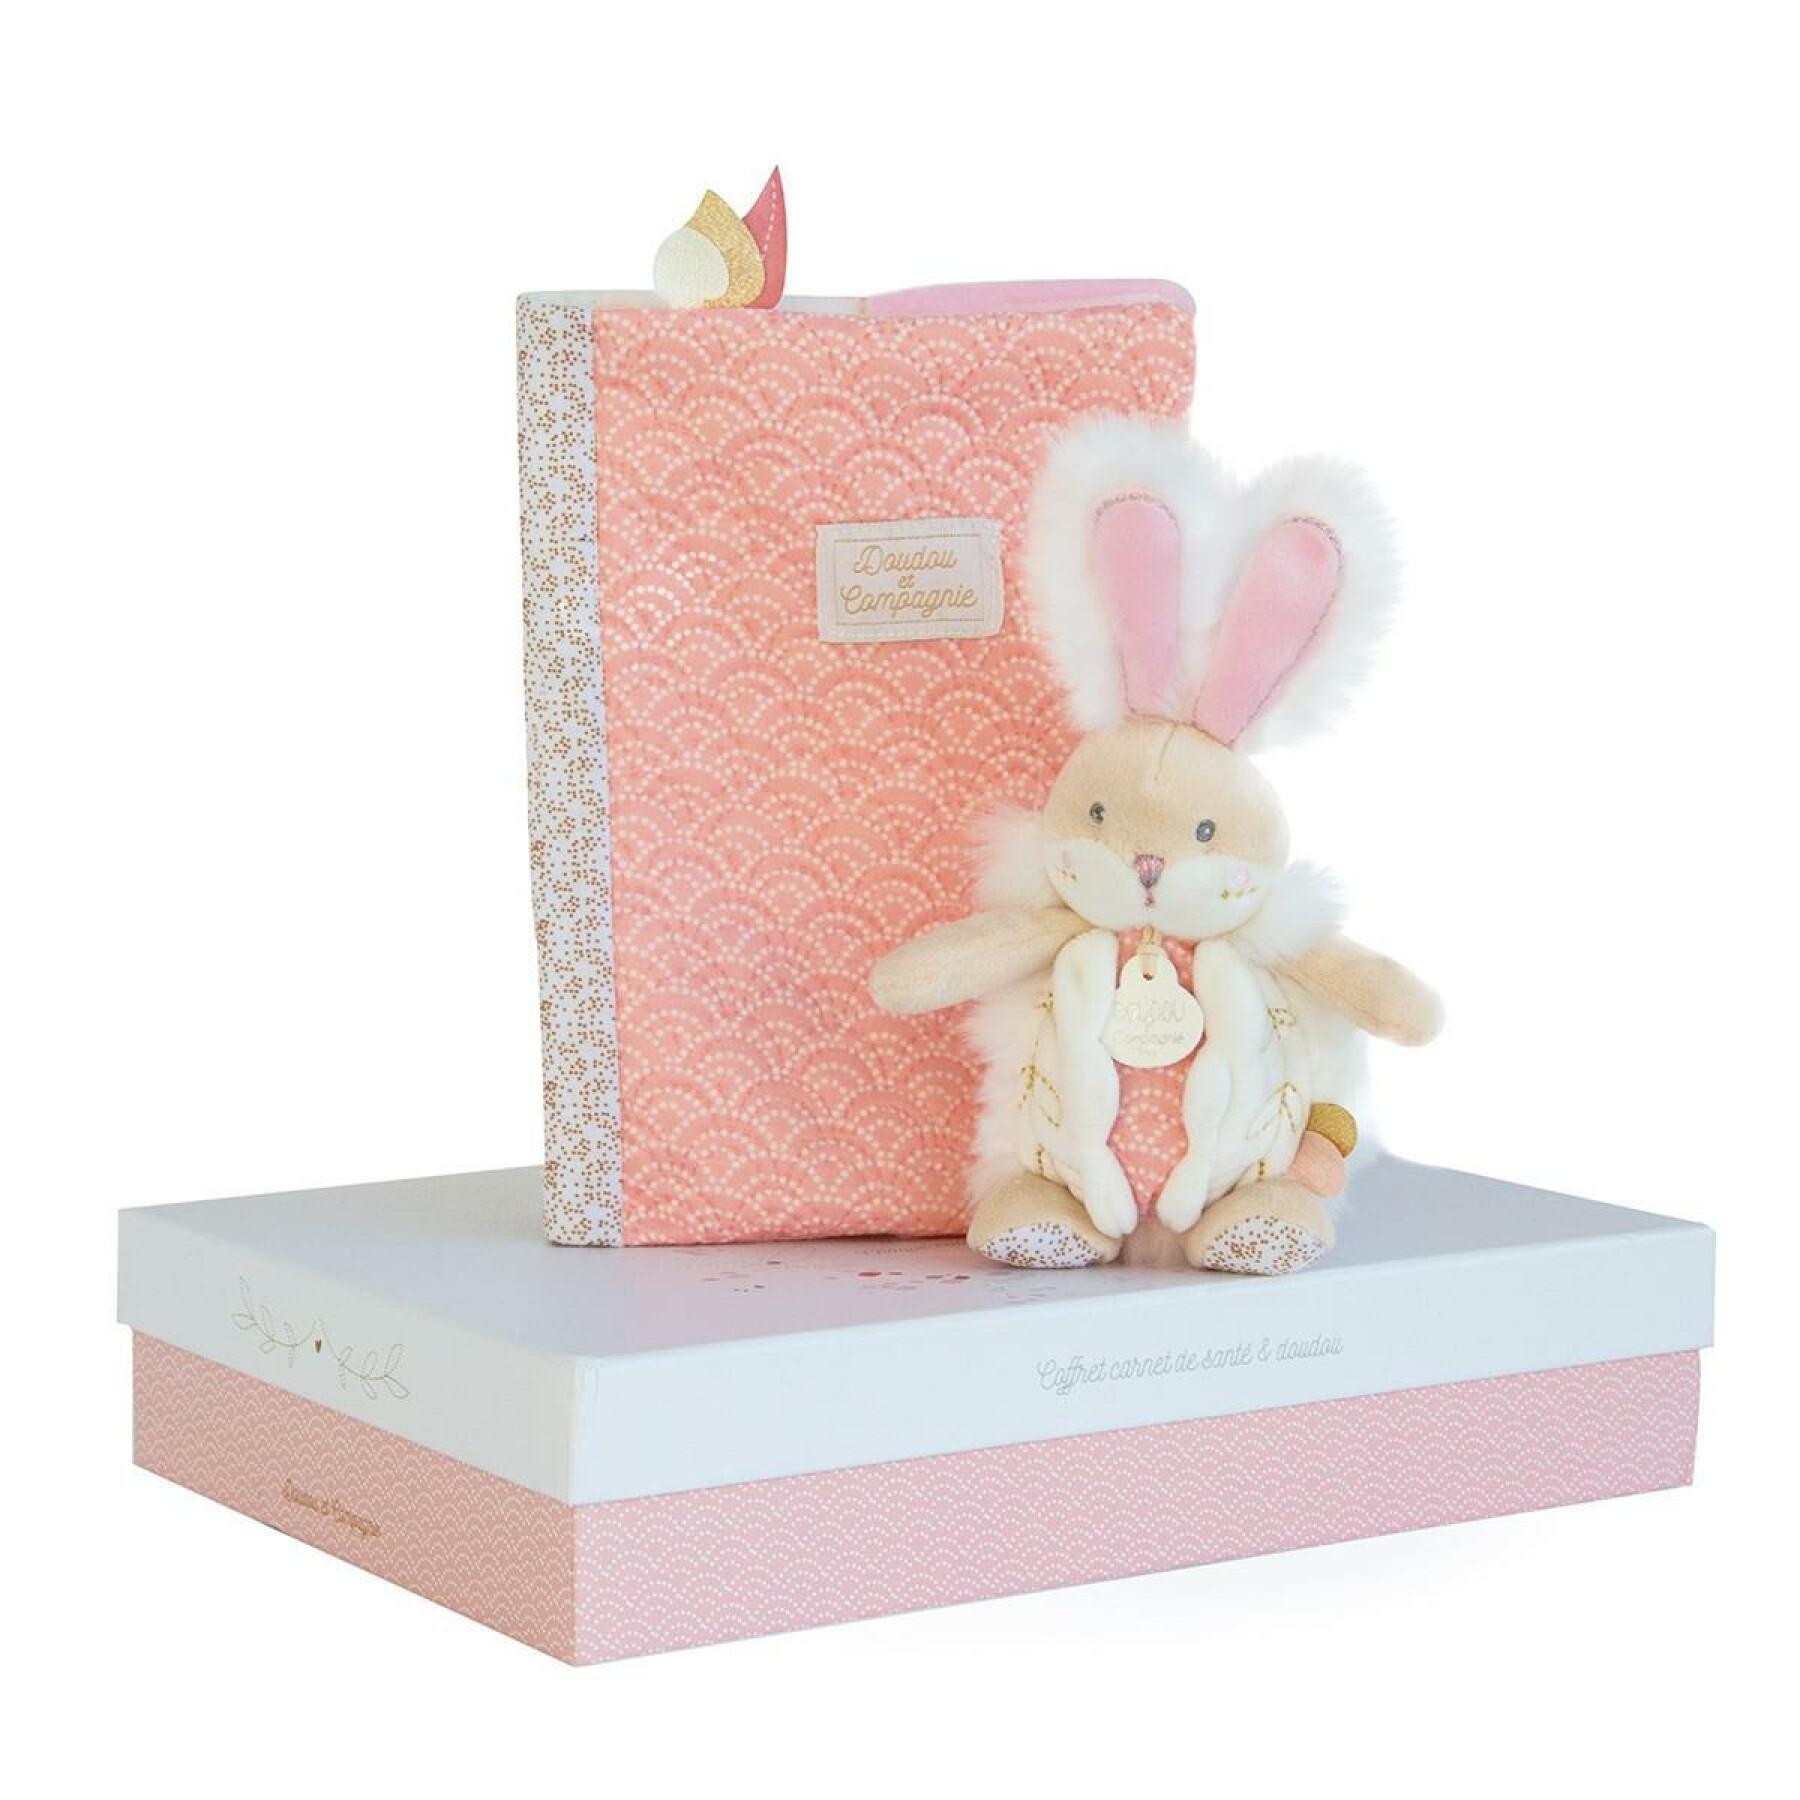 Health booklet cover box Doudou & compagnie